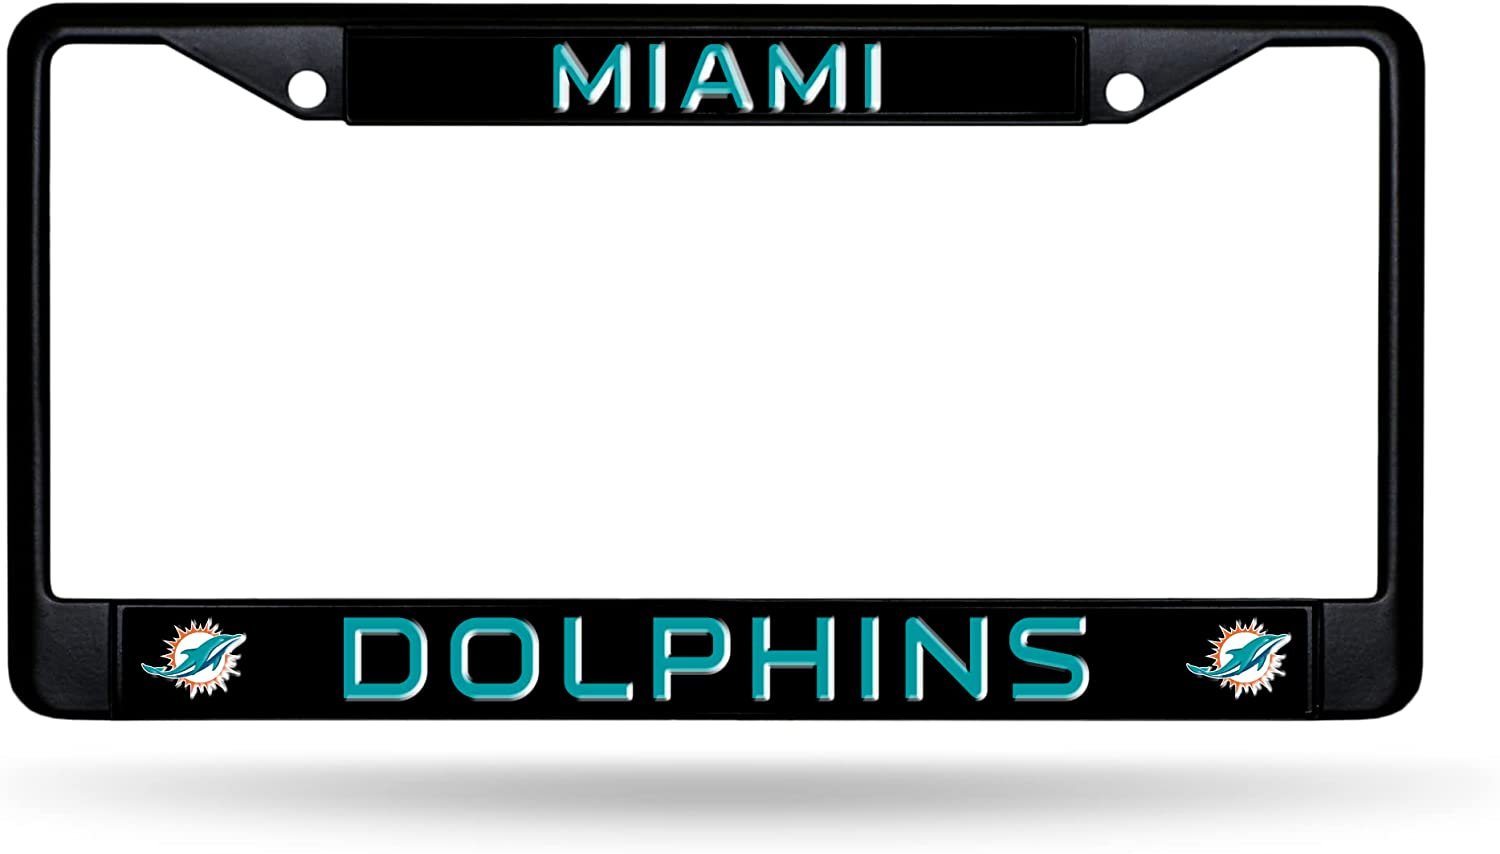 Miami Dolphins Black Metal License Plate Frame Chrome Tag Cover 6x12 Inch